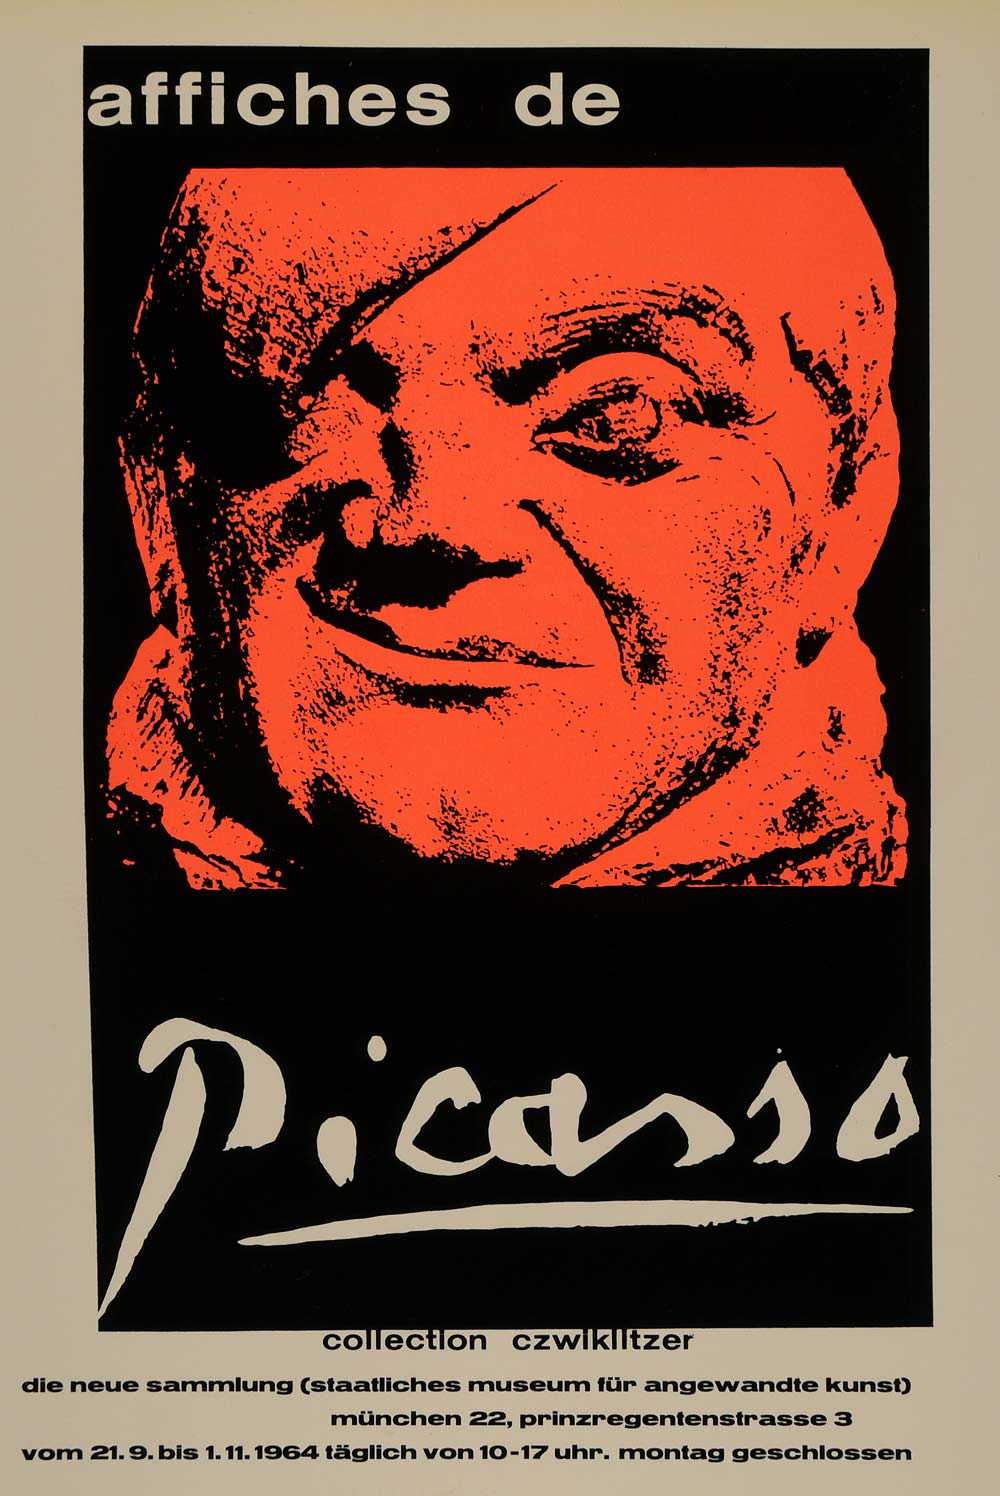 1971 Print Picasso Posters Art Czwiklitzer Collection - ORIGINAL PIC3